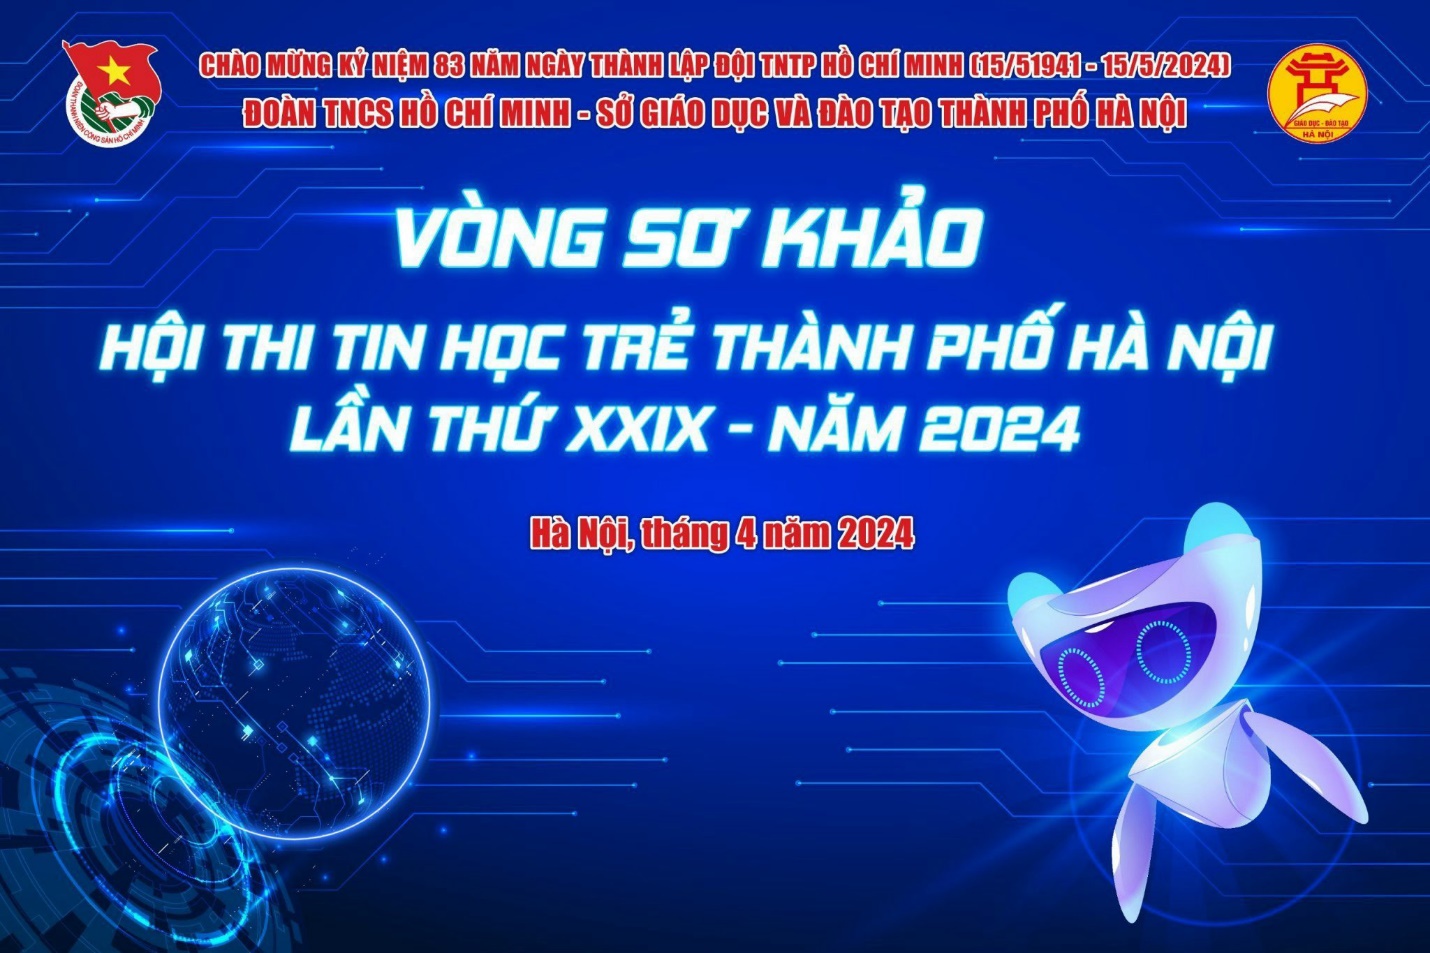 A blue and white banner with text and cartoon characters

Description automatically generated